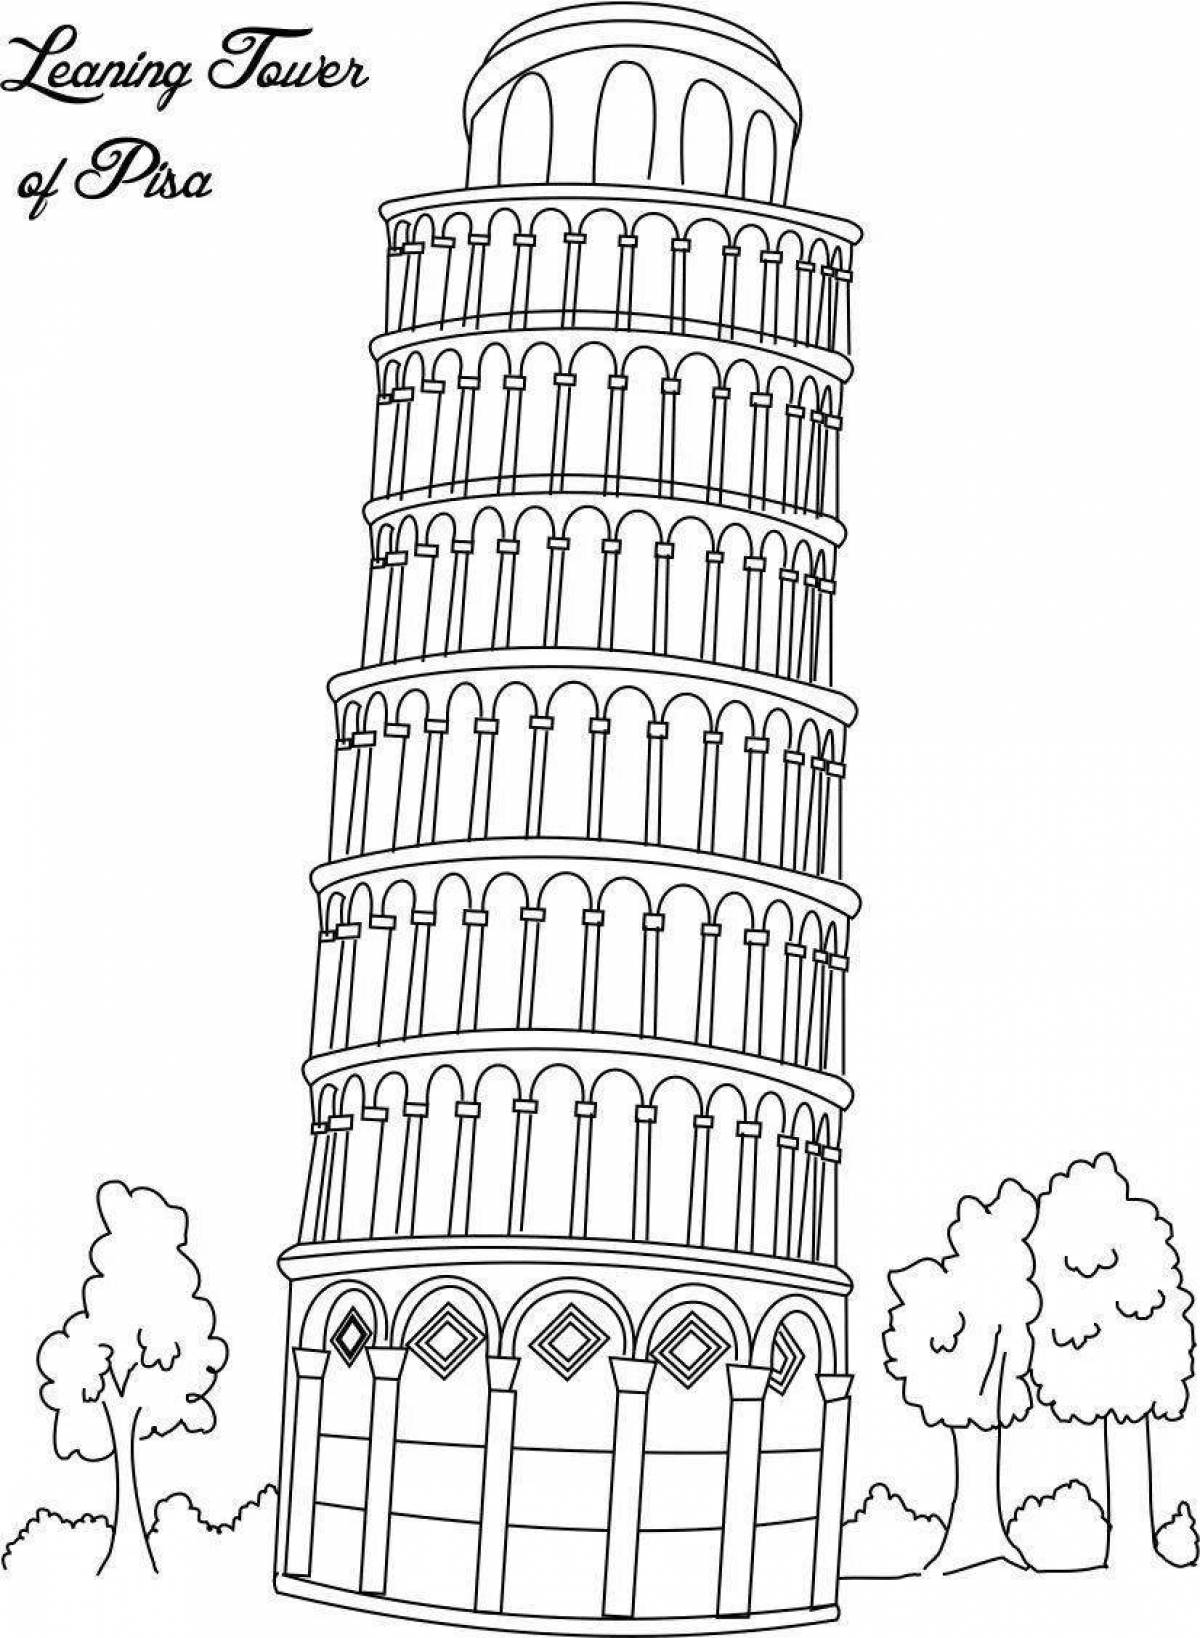 Leaning Tower of Pisa #3